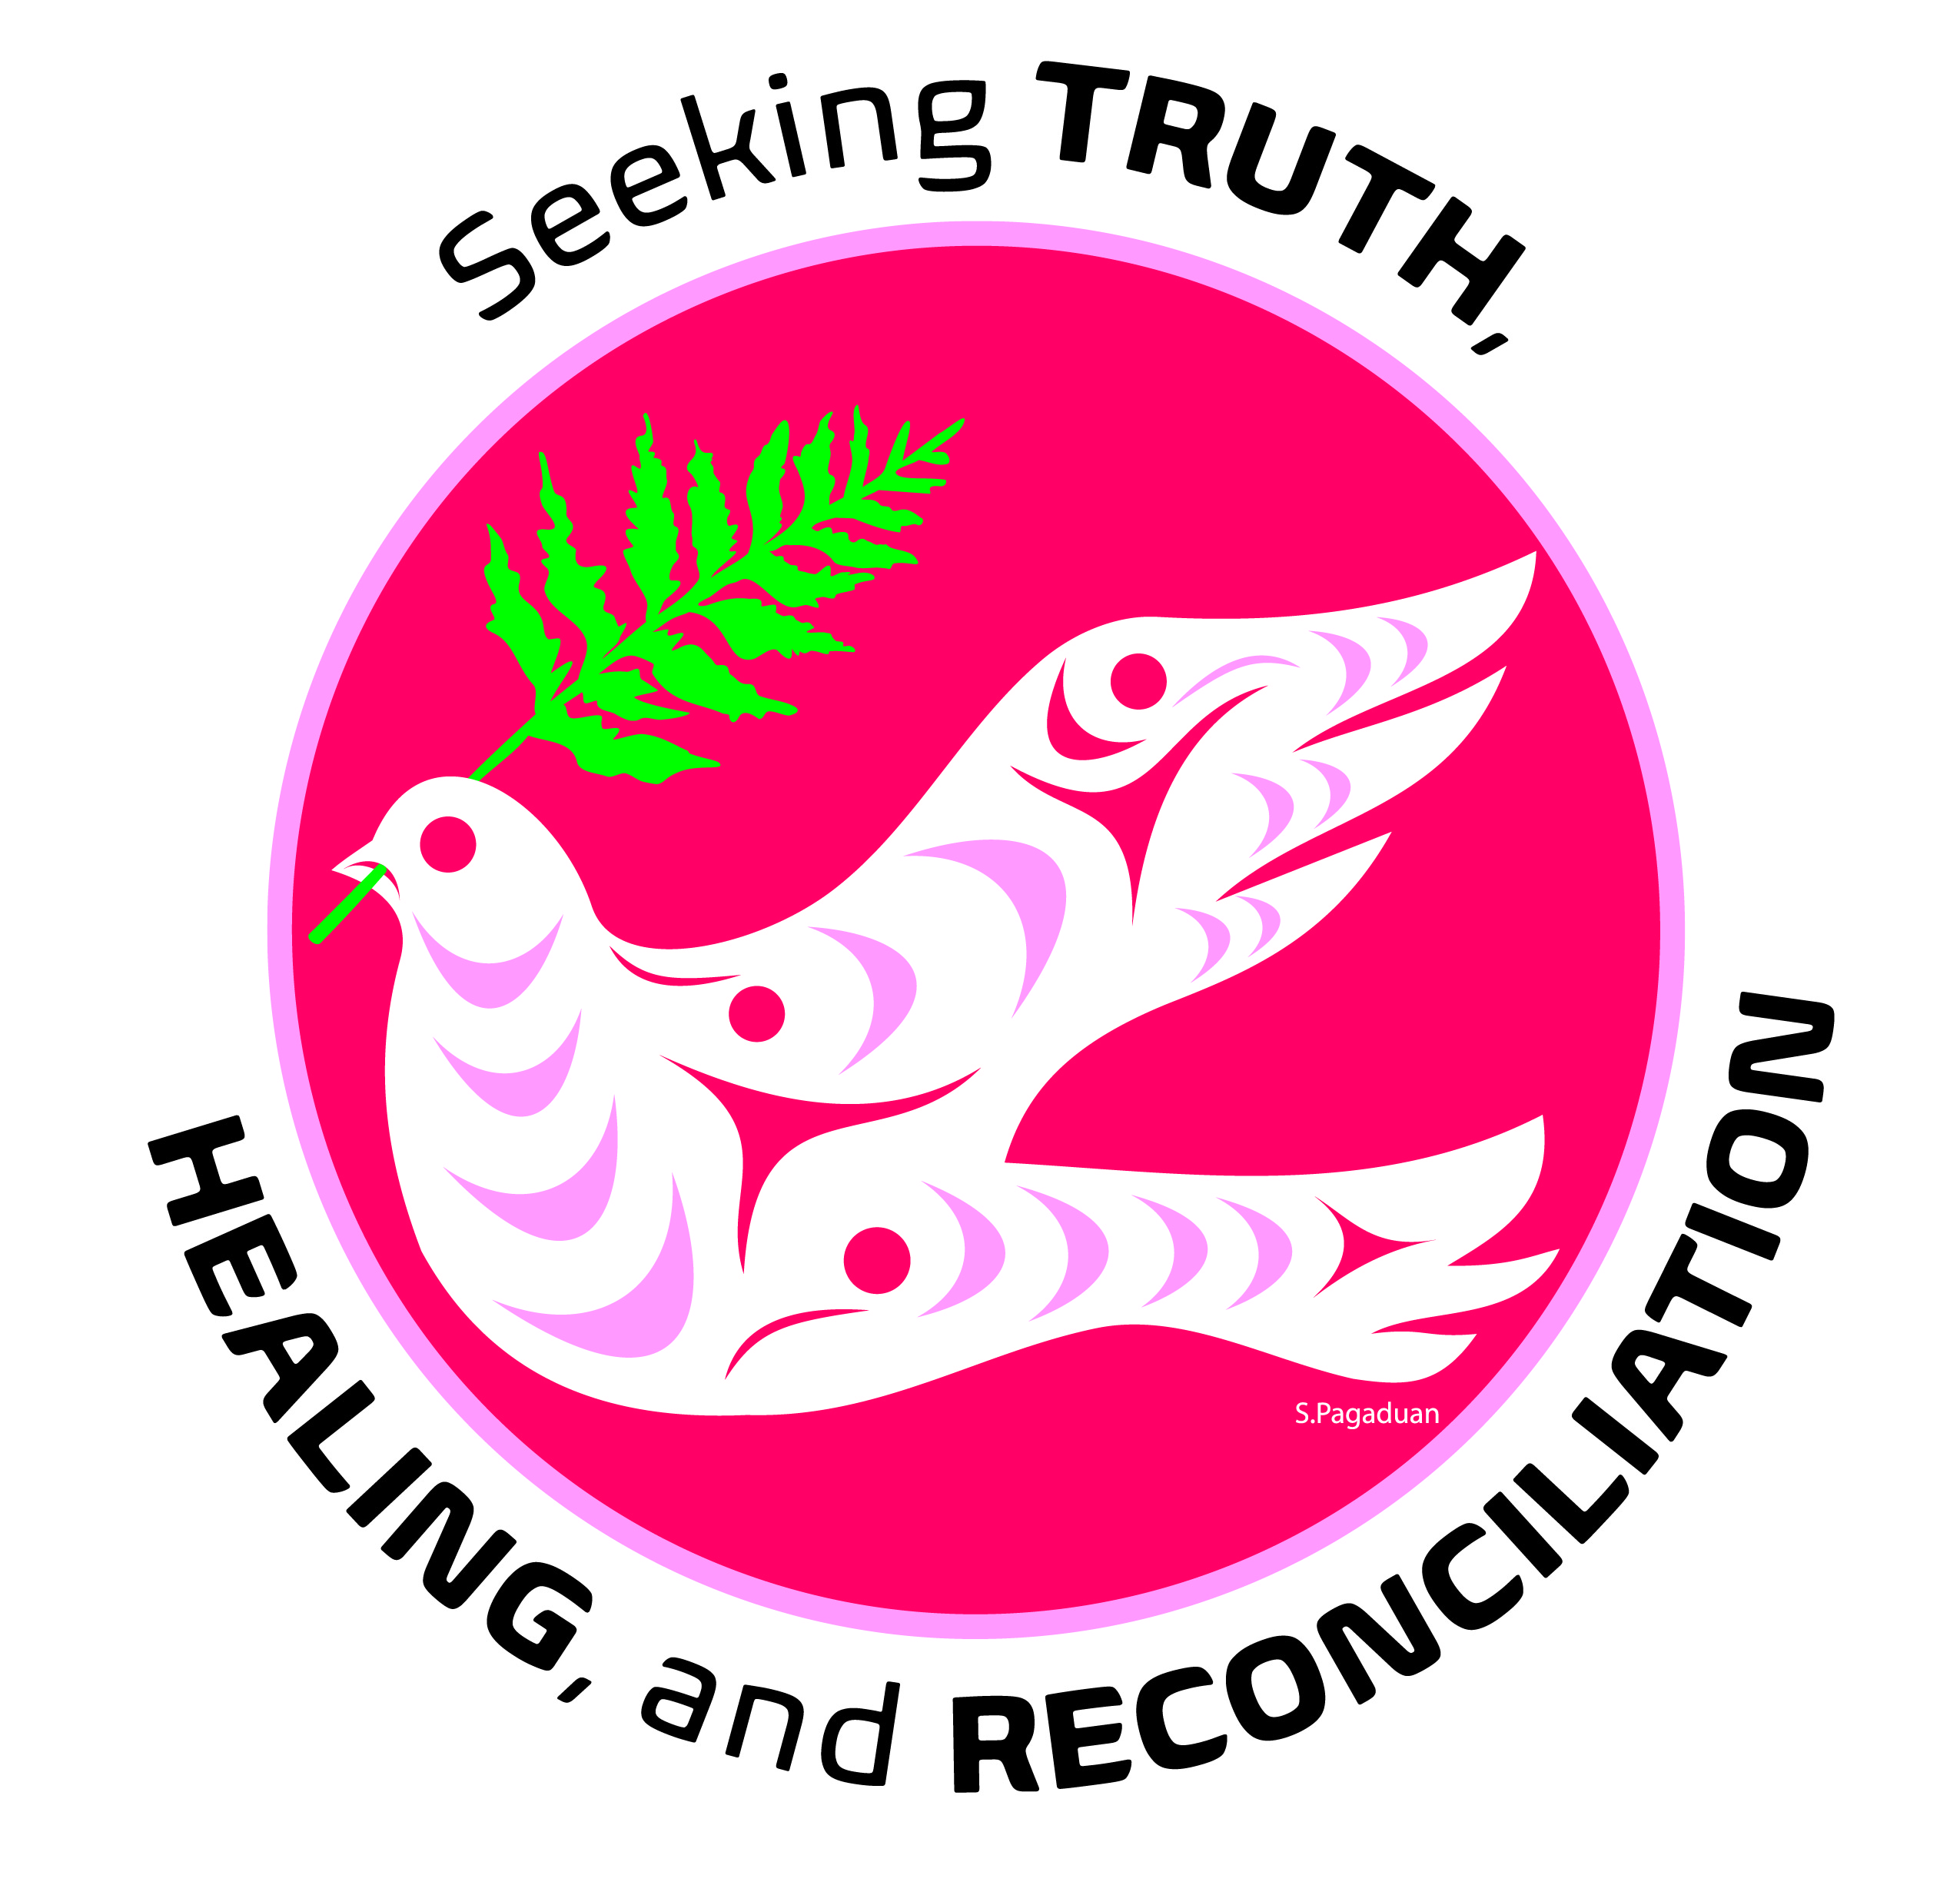 Nov 26: Diocesan Faith Day - Seeking Truth, Healing and Reconciliation